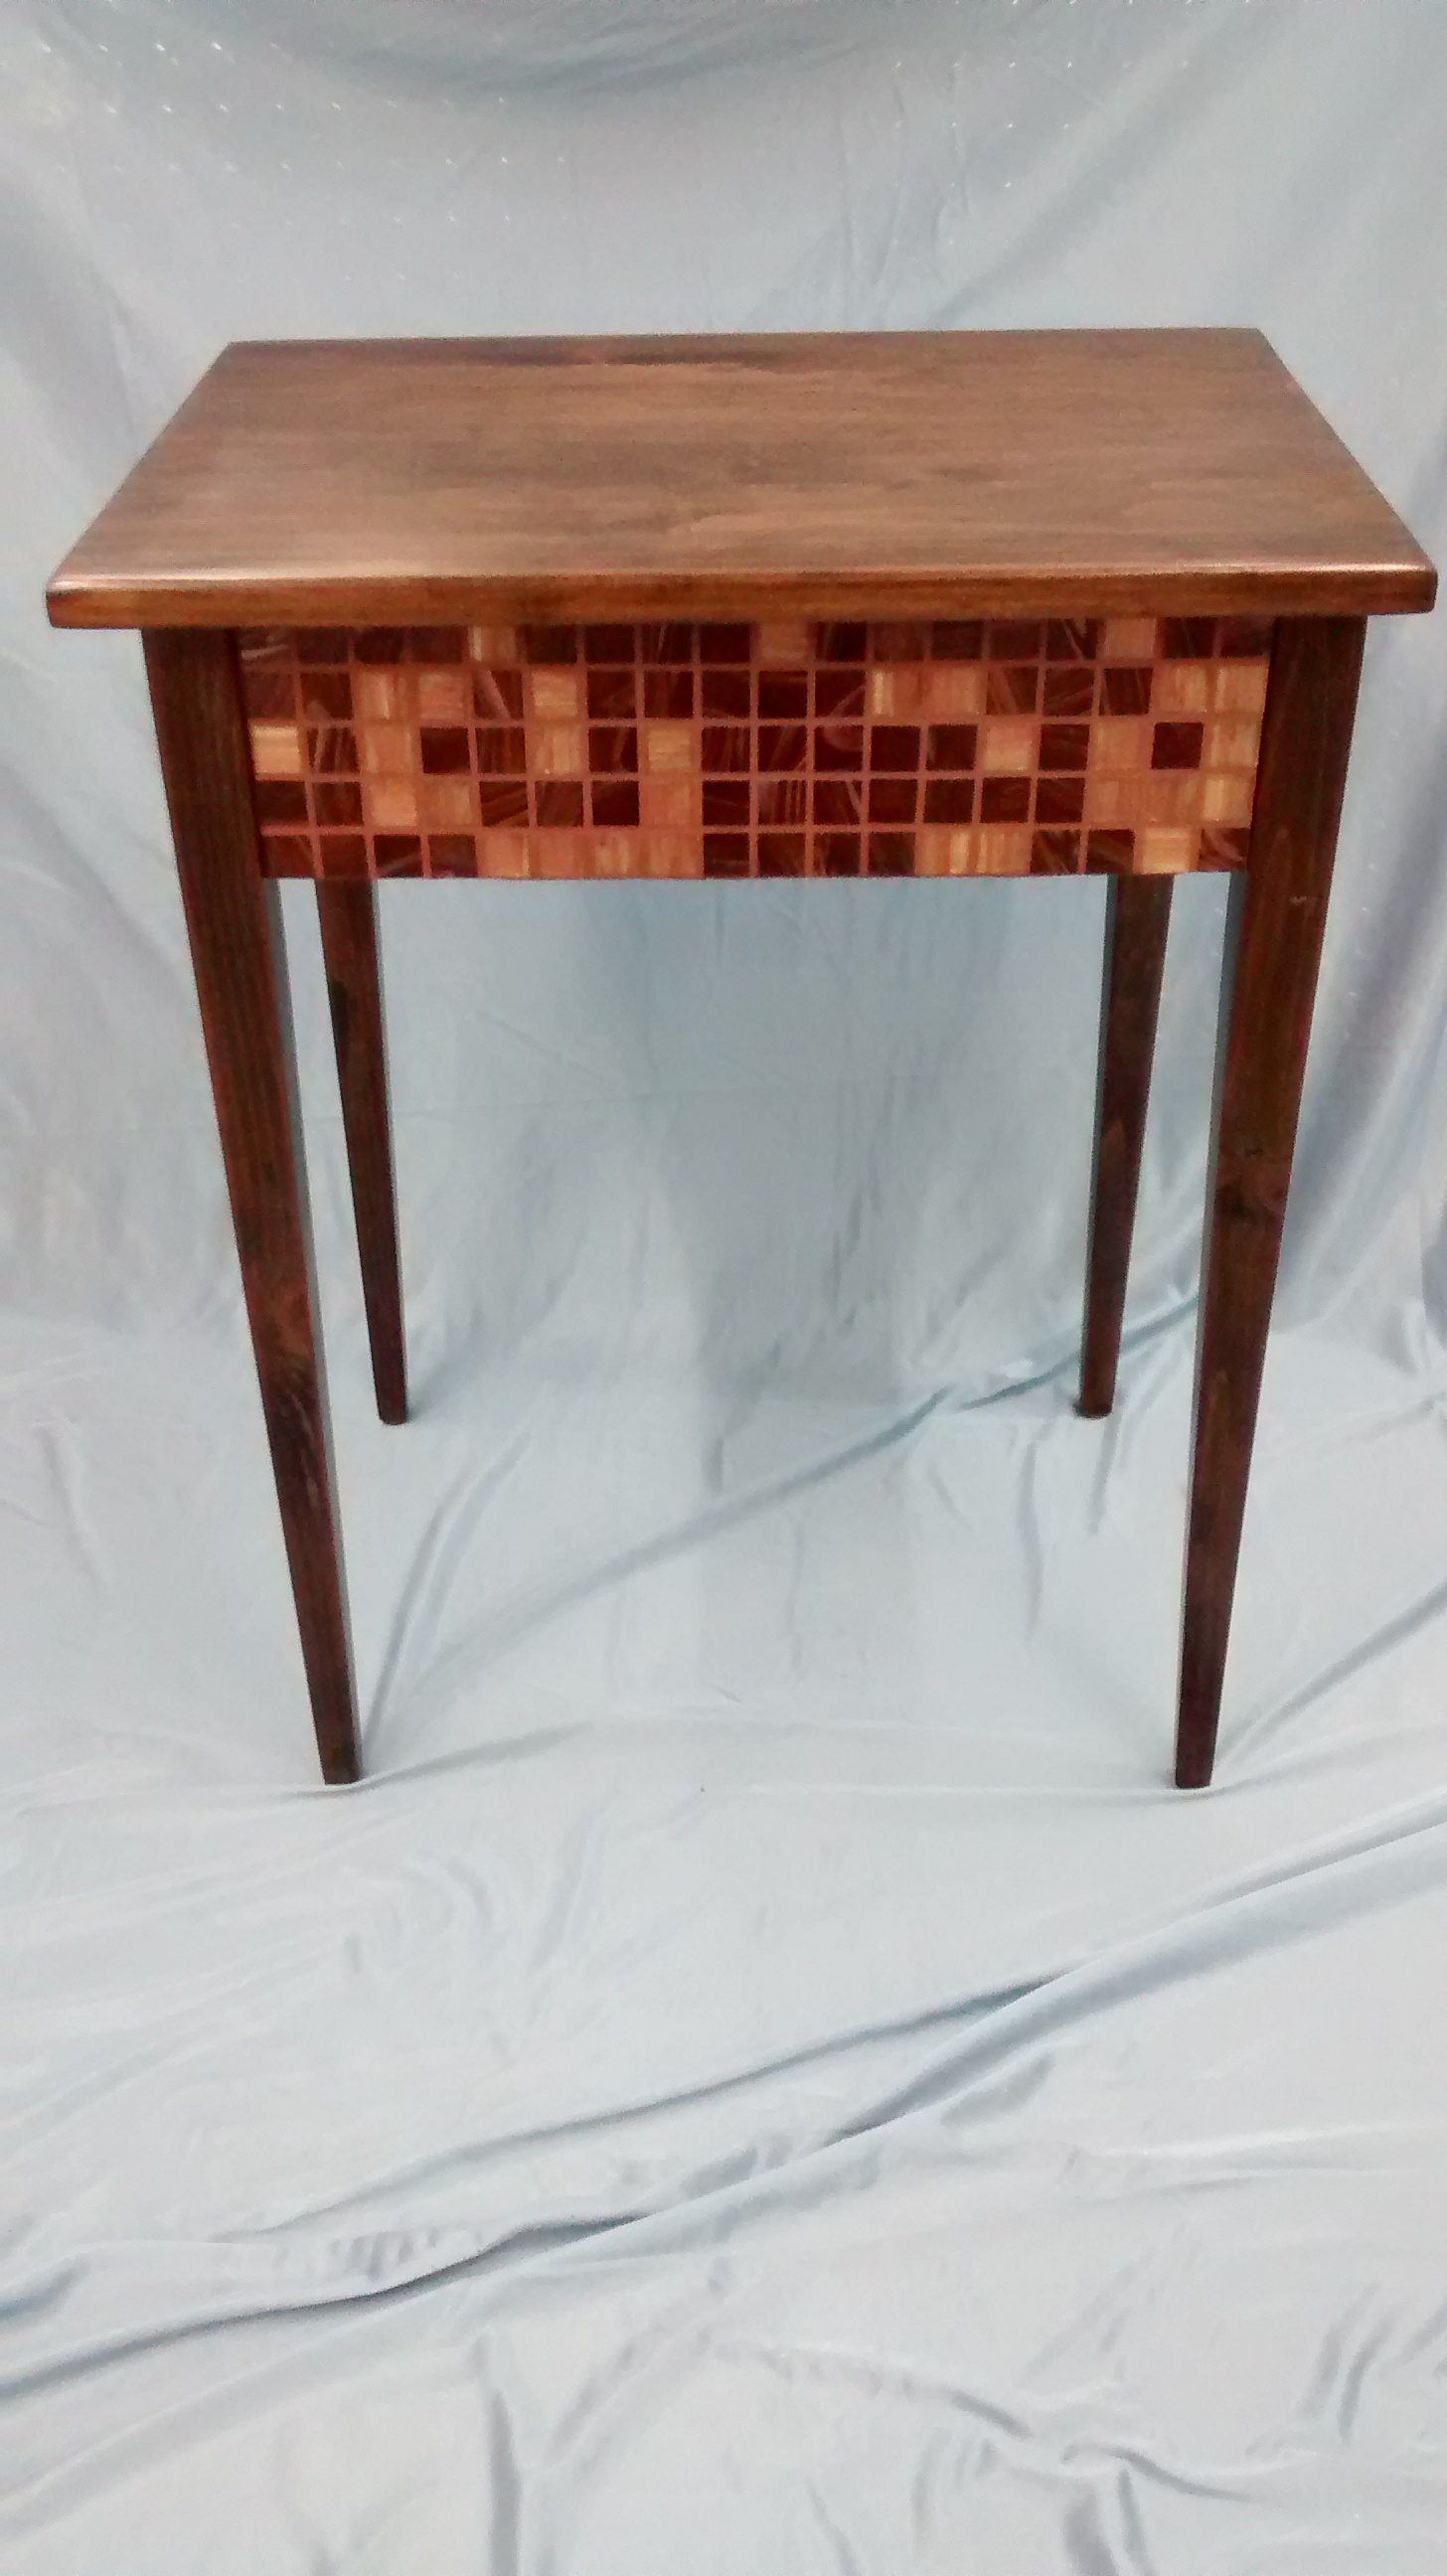 Wooden End Table with Mosaic Tile Rails